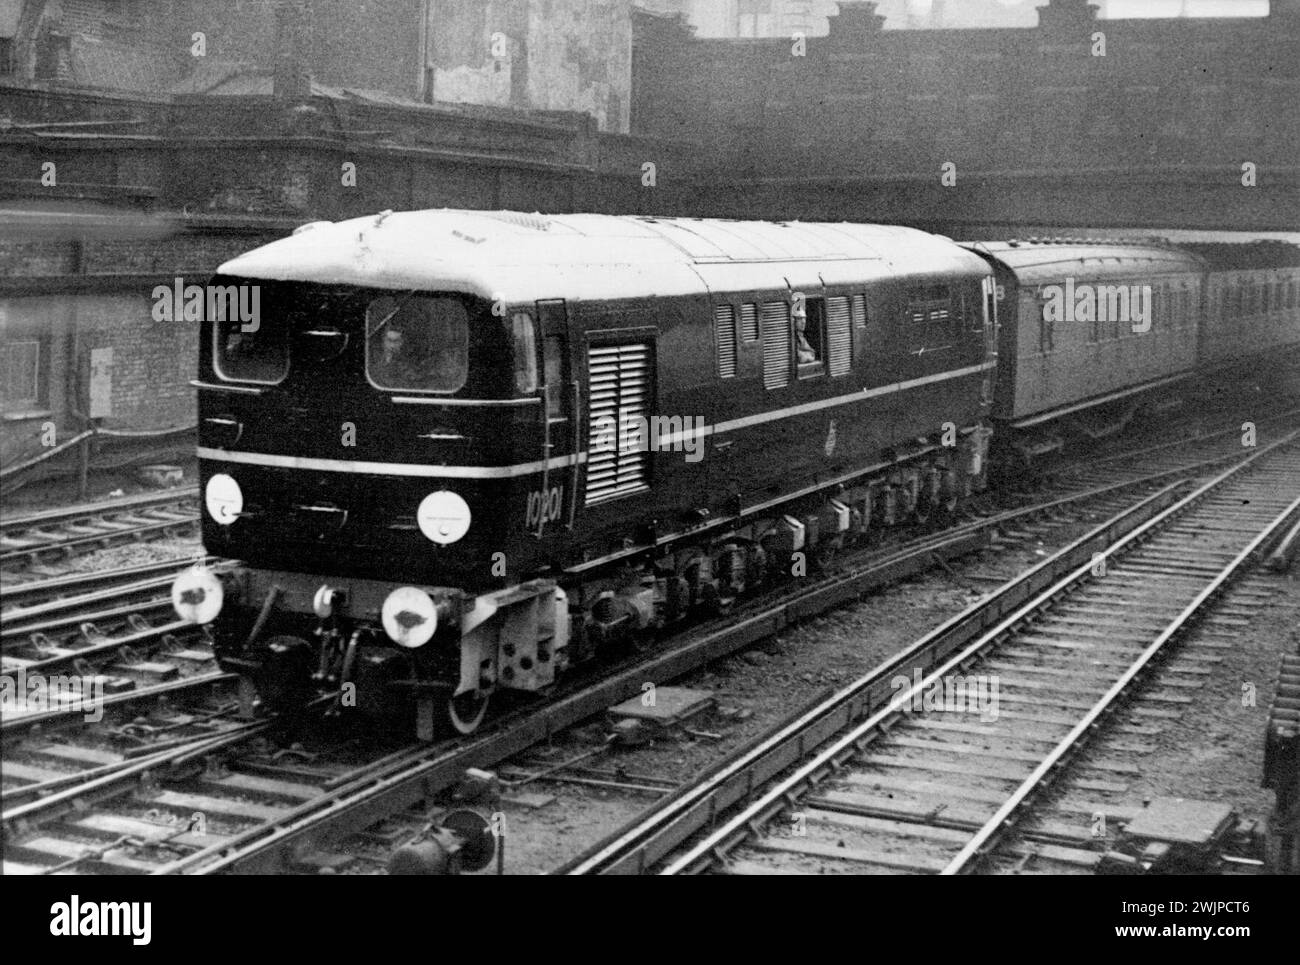 New Diesel Engine For British Railways -- The new Diesel electric locomotive arriving at Victoria Station, London, during a test run. The first of three new express passenger Diesel Electric locomotives, designed and built at the Ashford (Kent) Works of the Southern Region (British Railways), will shortly be in service. The locomotive is equipped with a 1600 h.p. Diesel engine generator and is capable of a speed of 80 miles per hour. It is 64 feet in length and weighs 135 tons. December 29, 1950. (Photo by S&G). Stock Photo